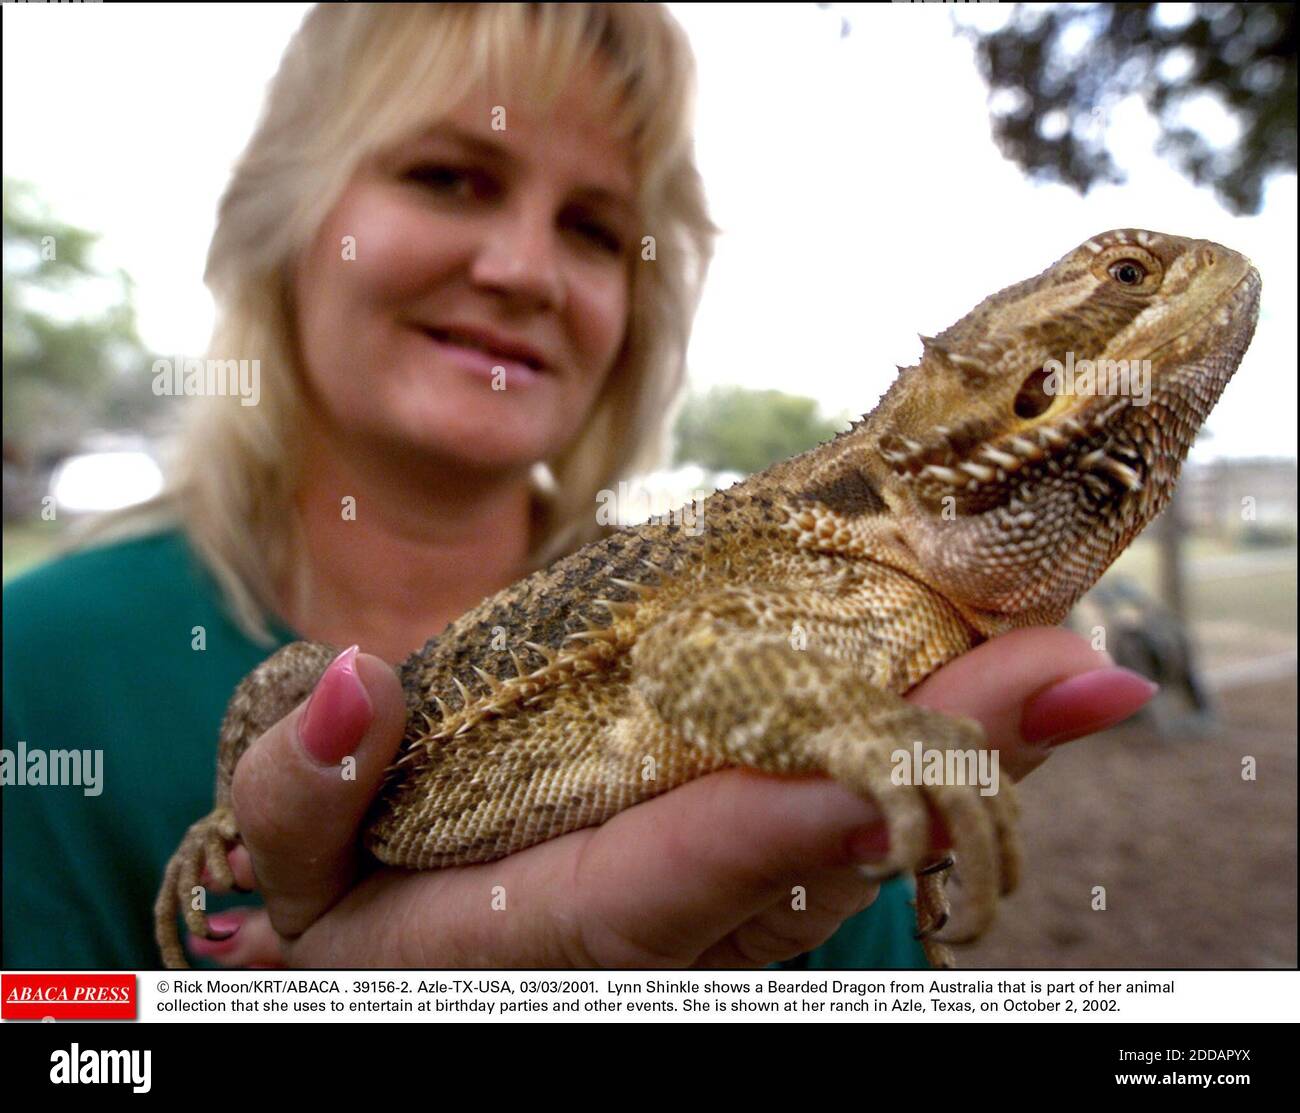 NO FILM, NO VIDEO, NO TV, NO DOCUMENTARY - © Rick Moon/KRT/ABACA . 39156-2.  Azle-TX-USA, 02/10/2002. Lynn Shinkle shows a Bearded Dragon from Australia  that is part of her animal collection that